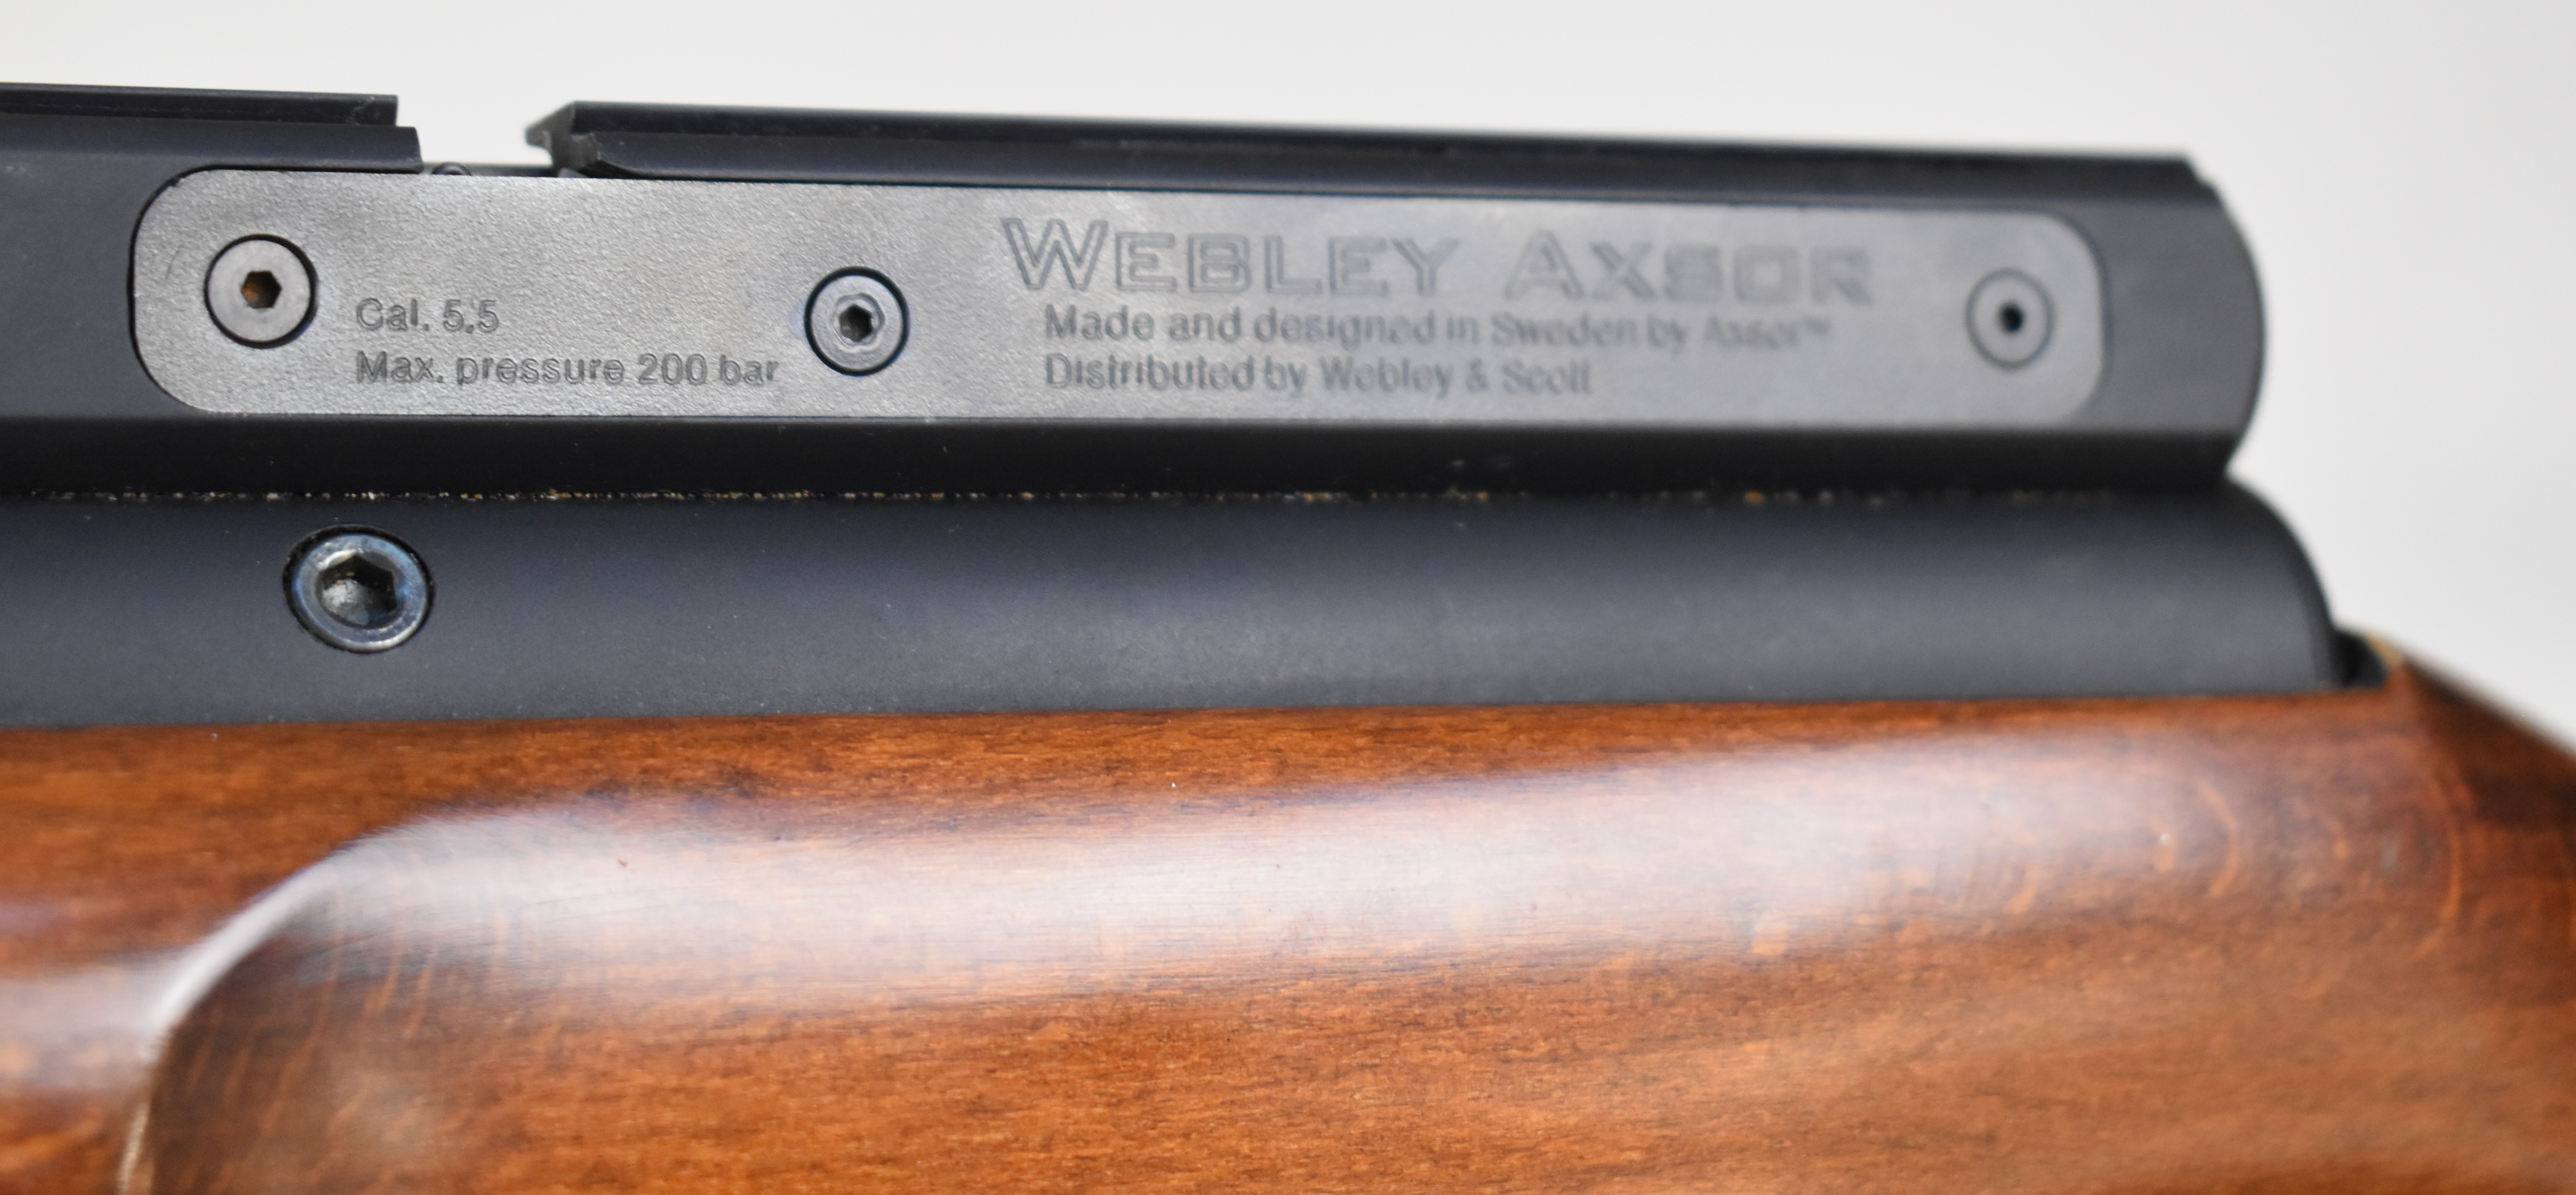 Webley Axsor .22 PCP air rifle with chequered semi-pistol grip and forend, raised cheek piece, - Image 10 of 20